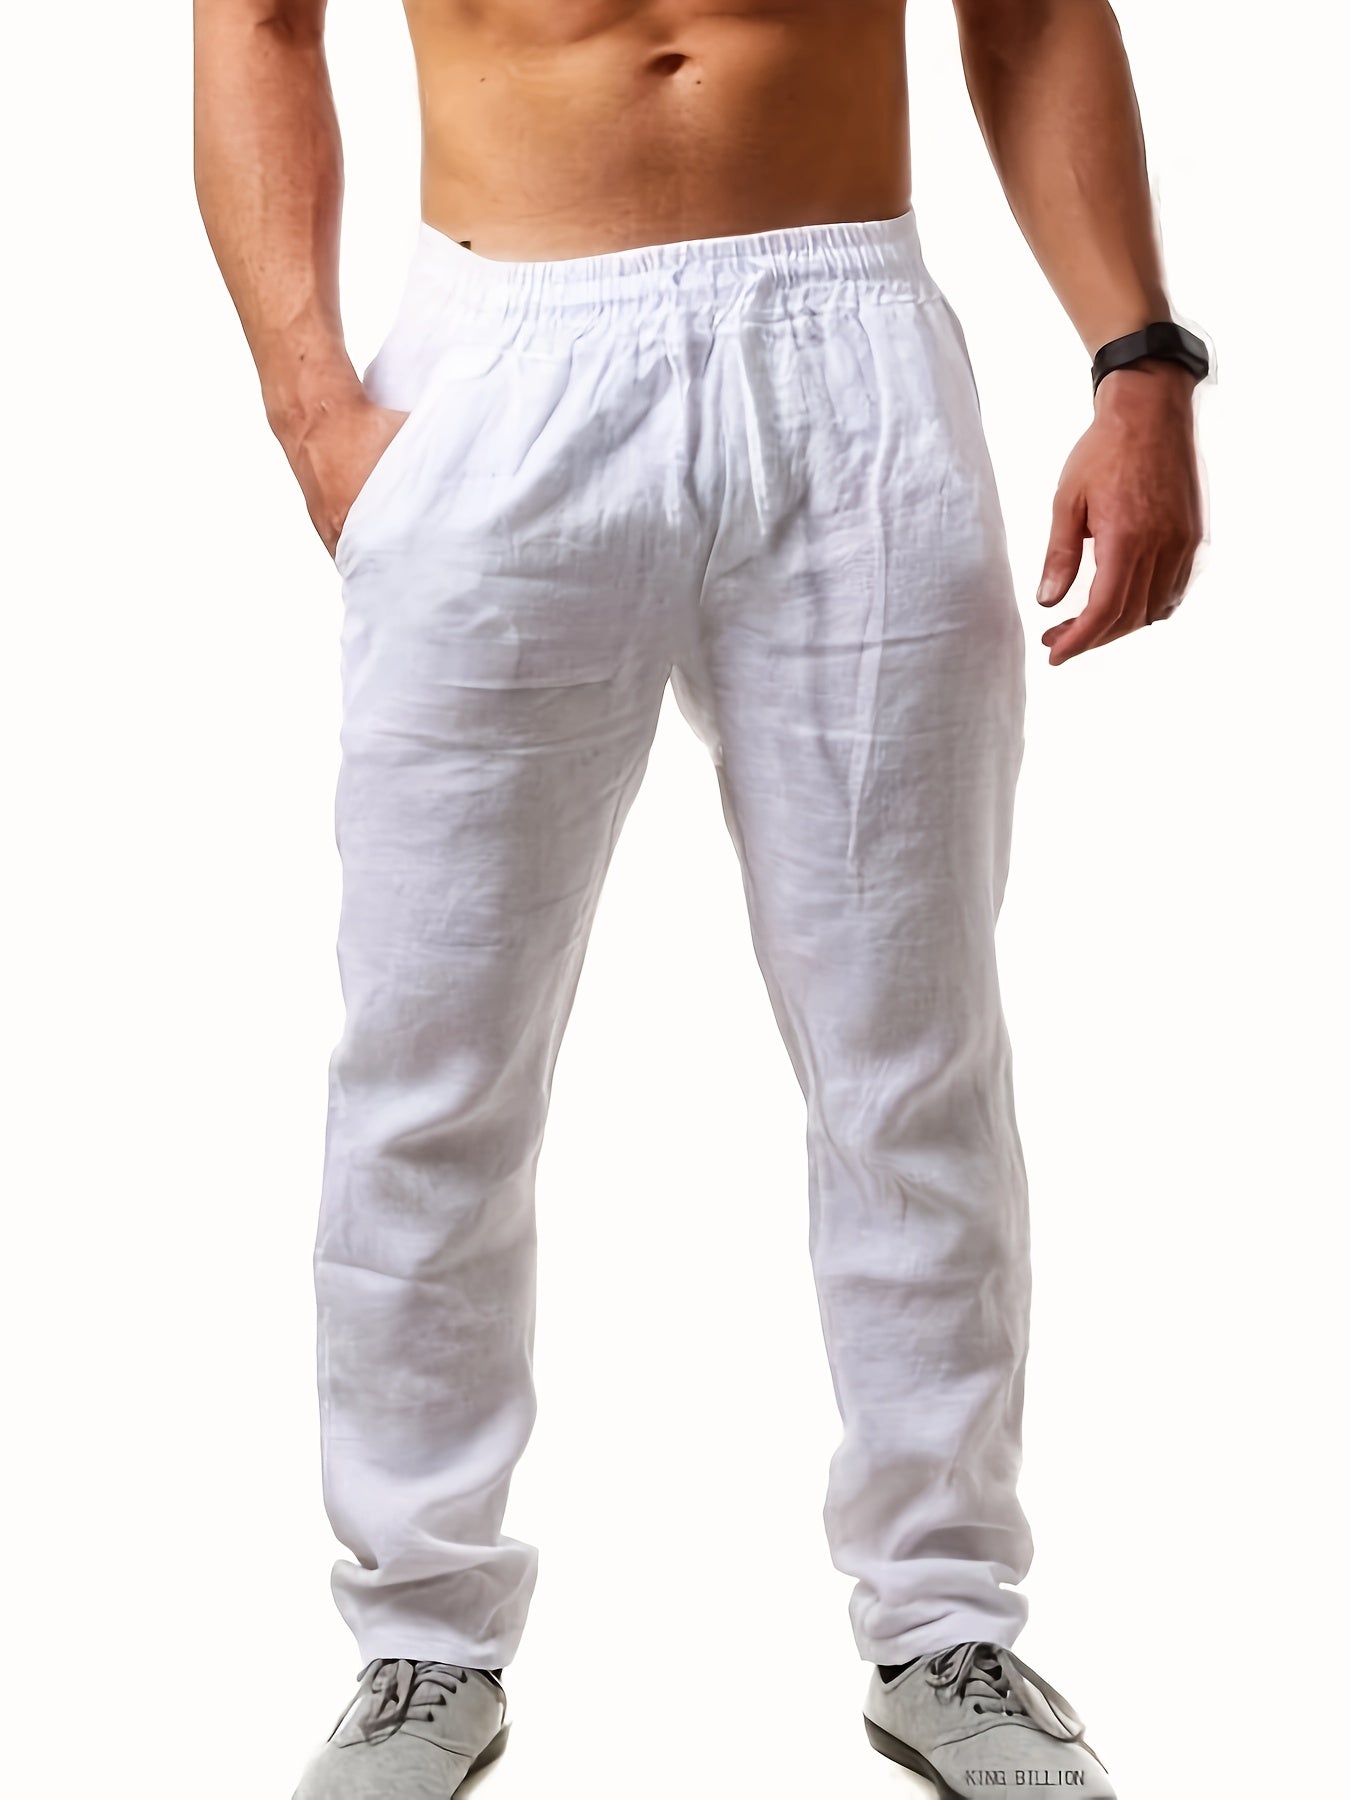 Fashionable Men's Solid Drawstring Casual Linen Pants,Suitable For Outdoor Sports, Comfortable And Versatile